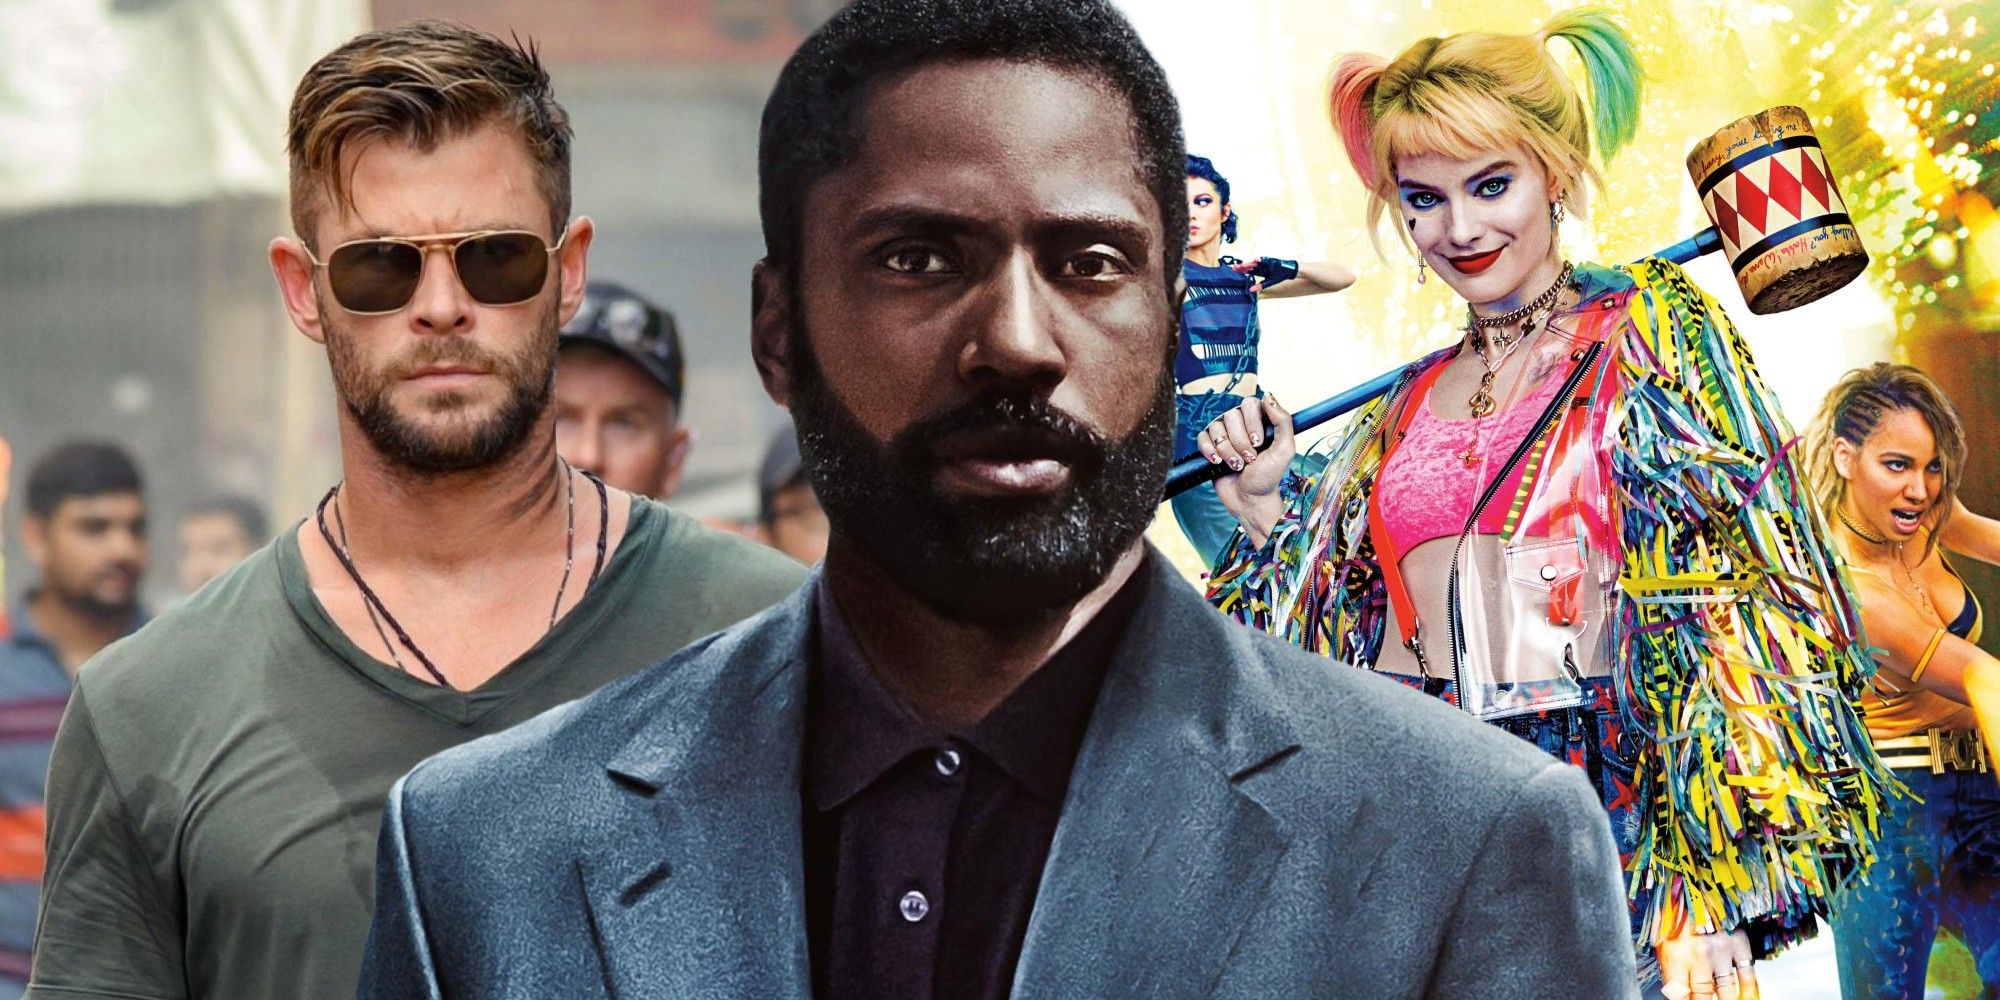 Best 2020 Series Action Movies - 16 Best Action Movies on Netflix 2020 - It's admittedly far down the list of 2020's offenses, but this has been an abysmal year for action movies.